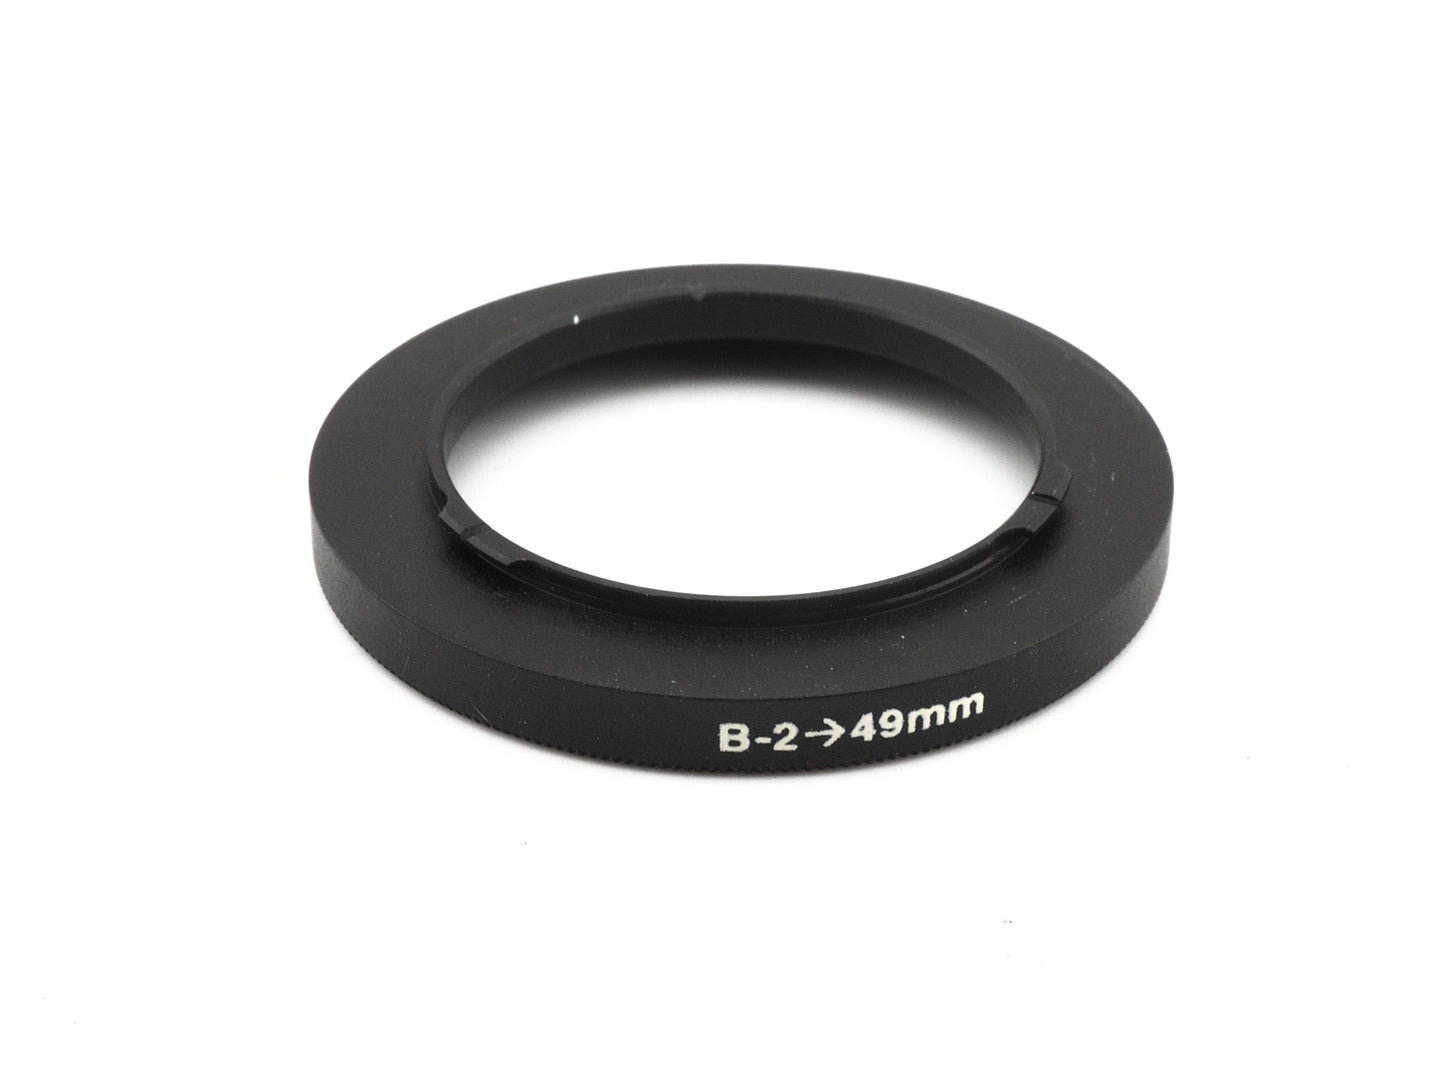 Generic Bay II - 49mm Step-Up Ring - Accessory